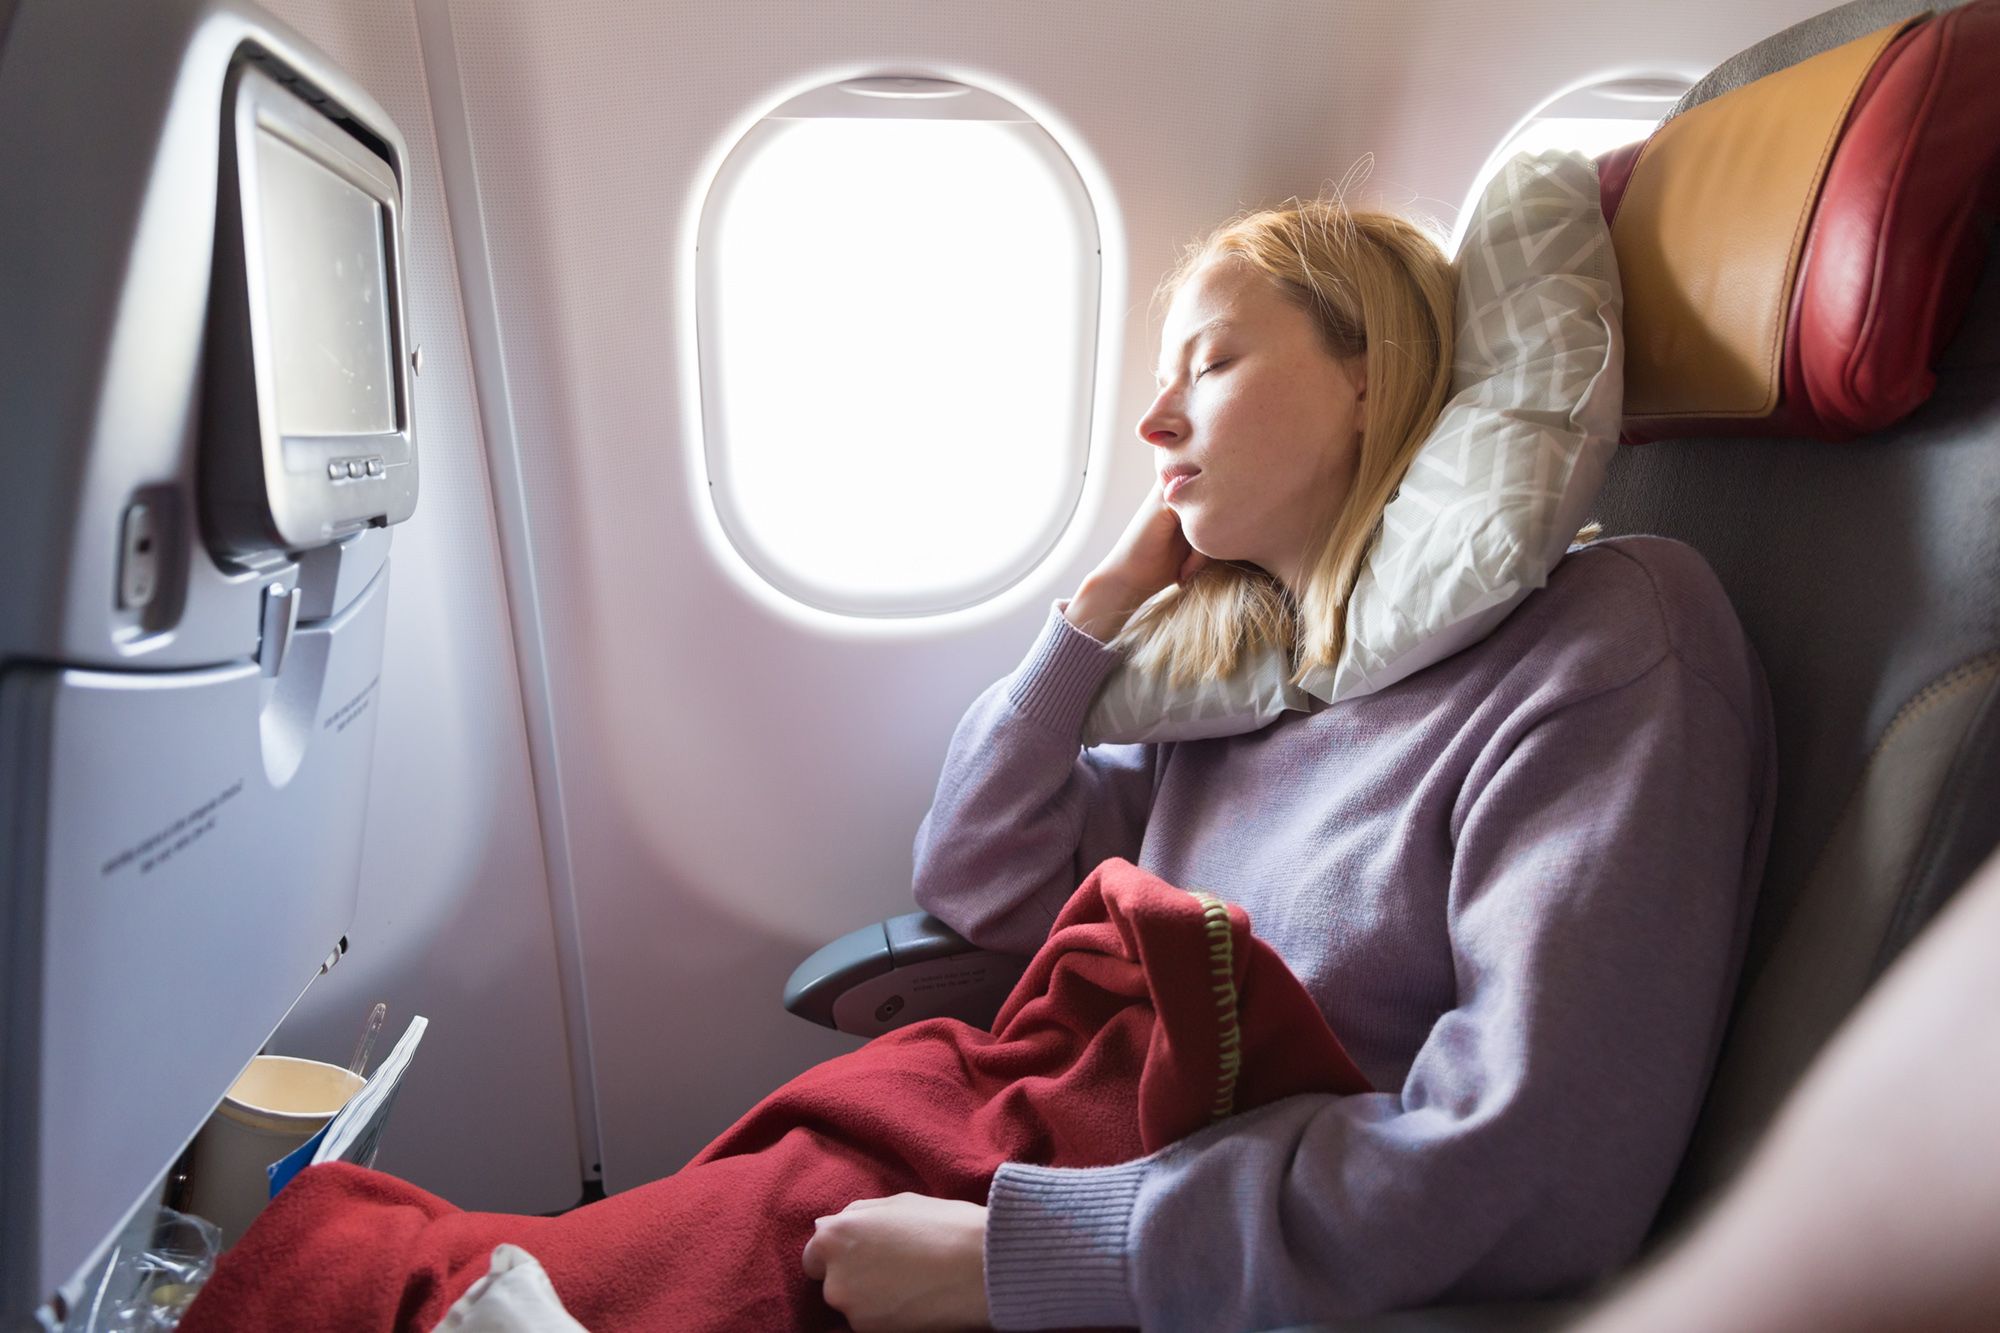 Can You Bring a Blanket on a Plane?